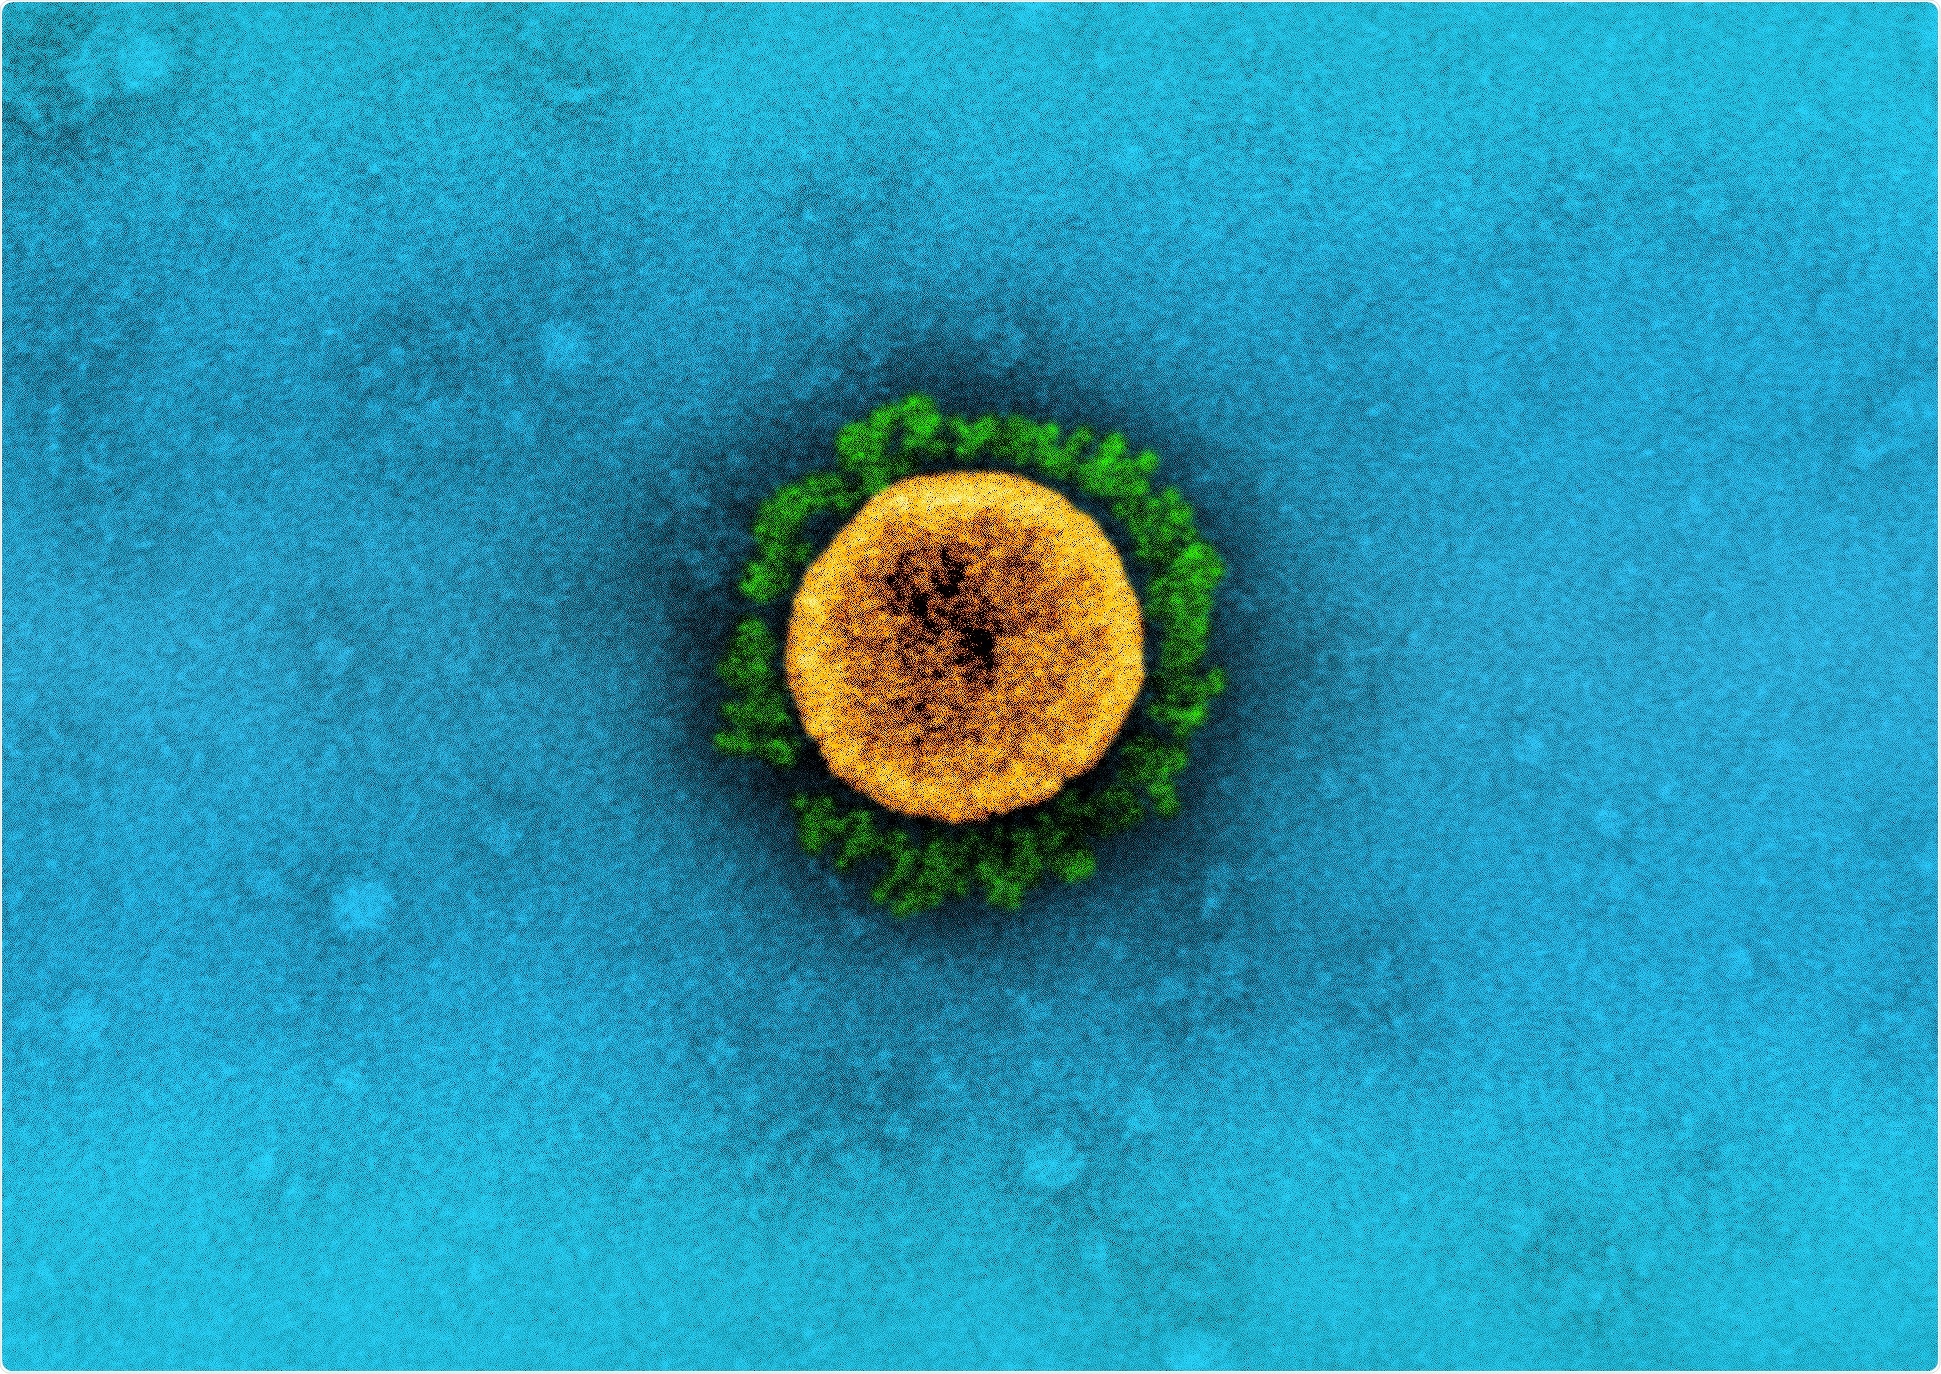 Study: A Novel SARS-CoV-2 Variant of Concern, B.1.526, Identified in New York. Image Credit: NIAID